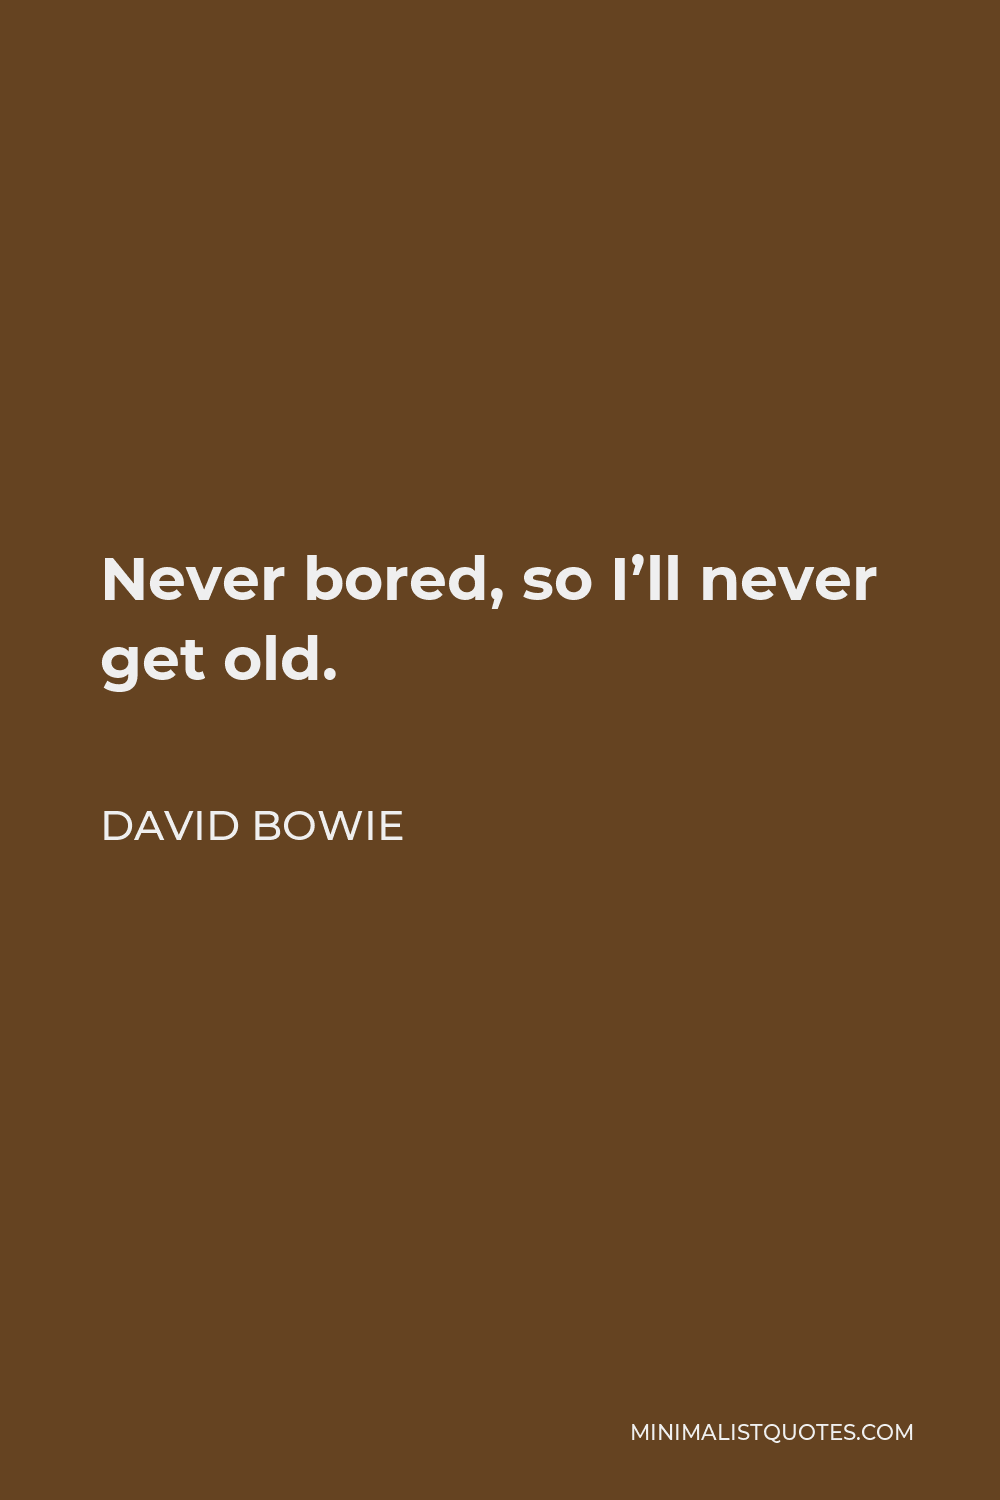 David Bowie Quote - Never bored, so I’ll never get old.